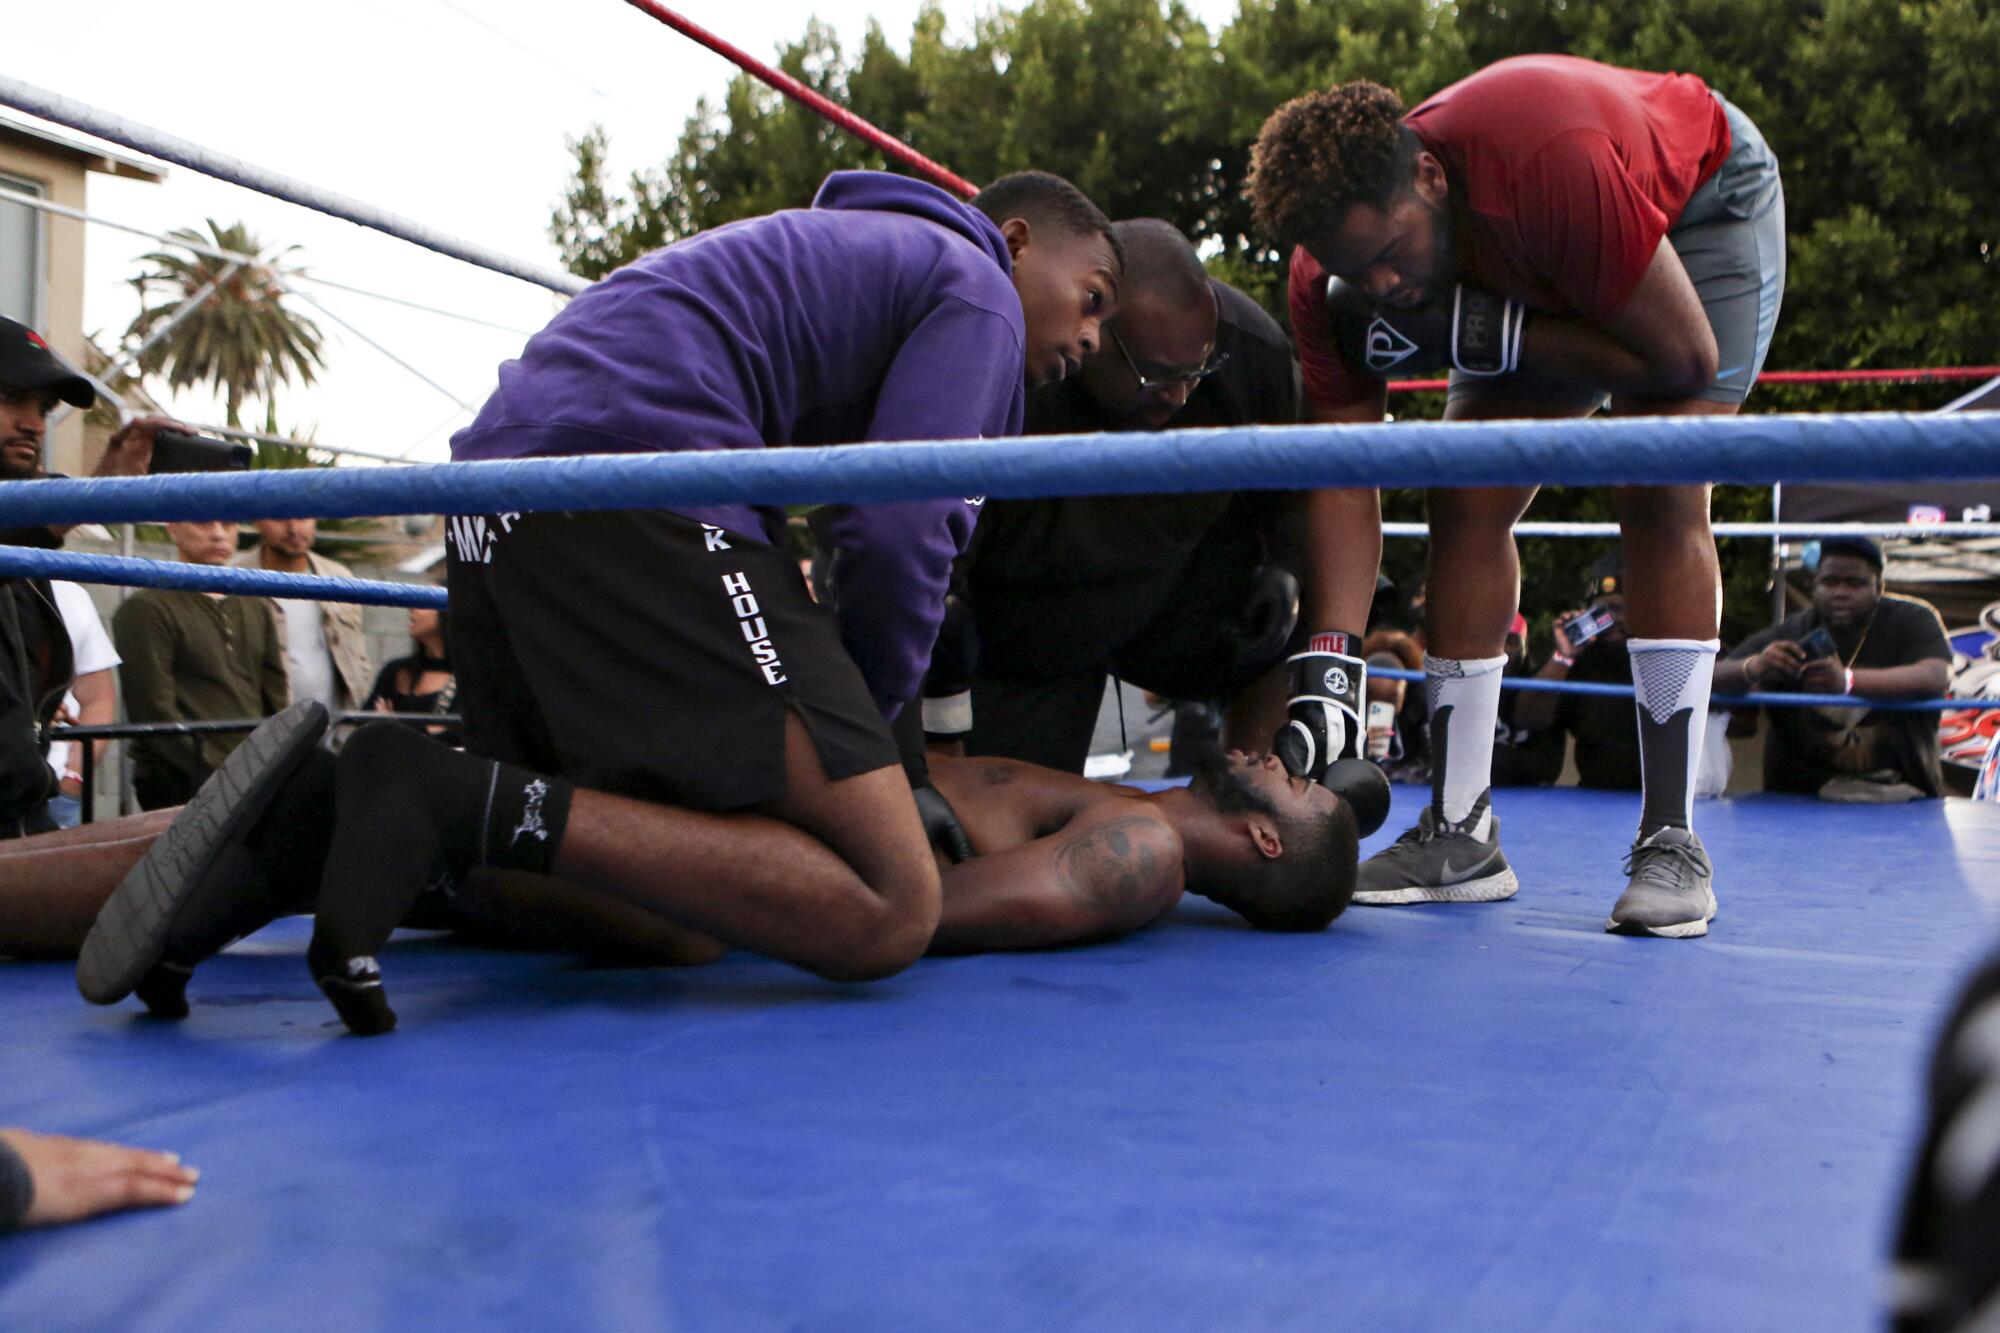 A man lies on the boxing ring mat as other men gather around him.